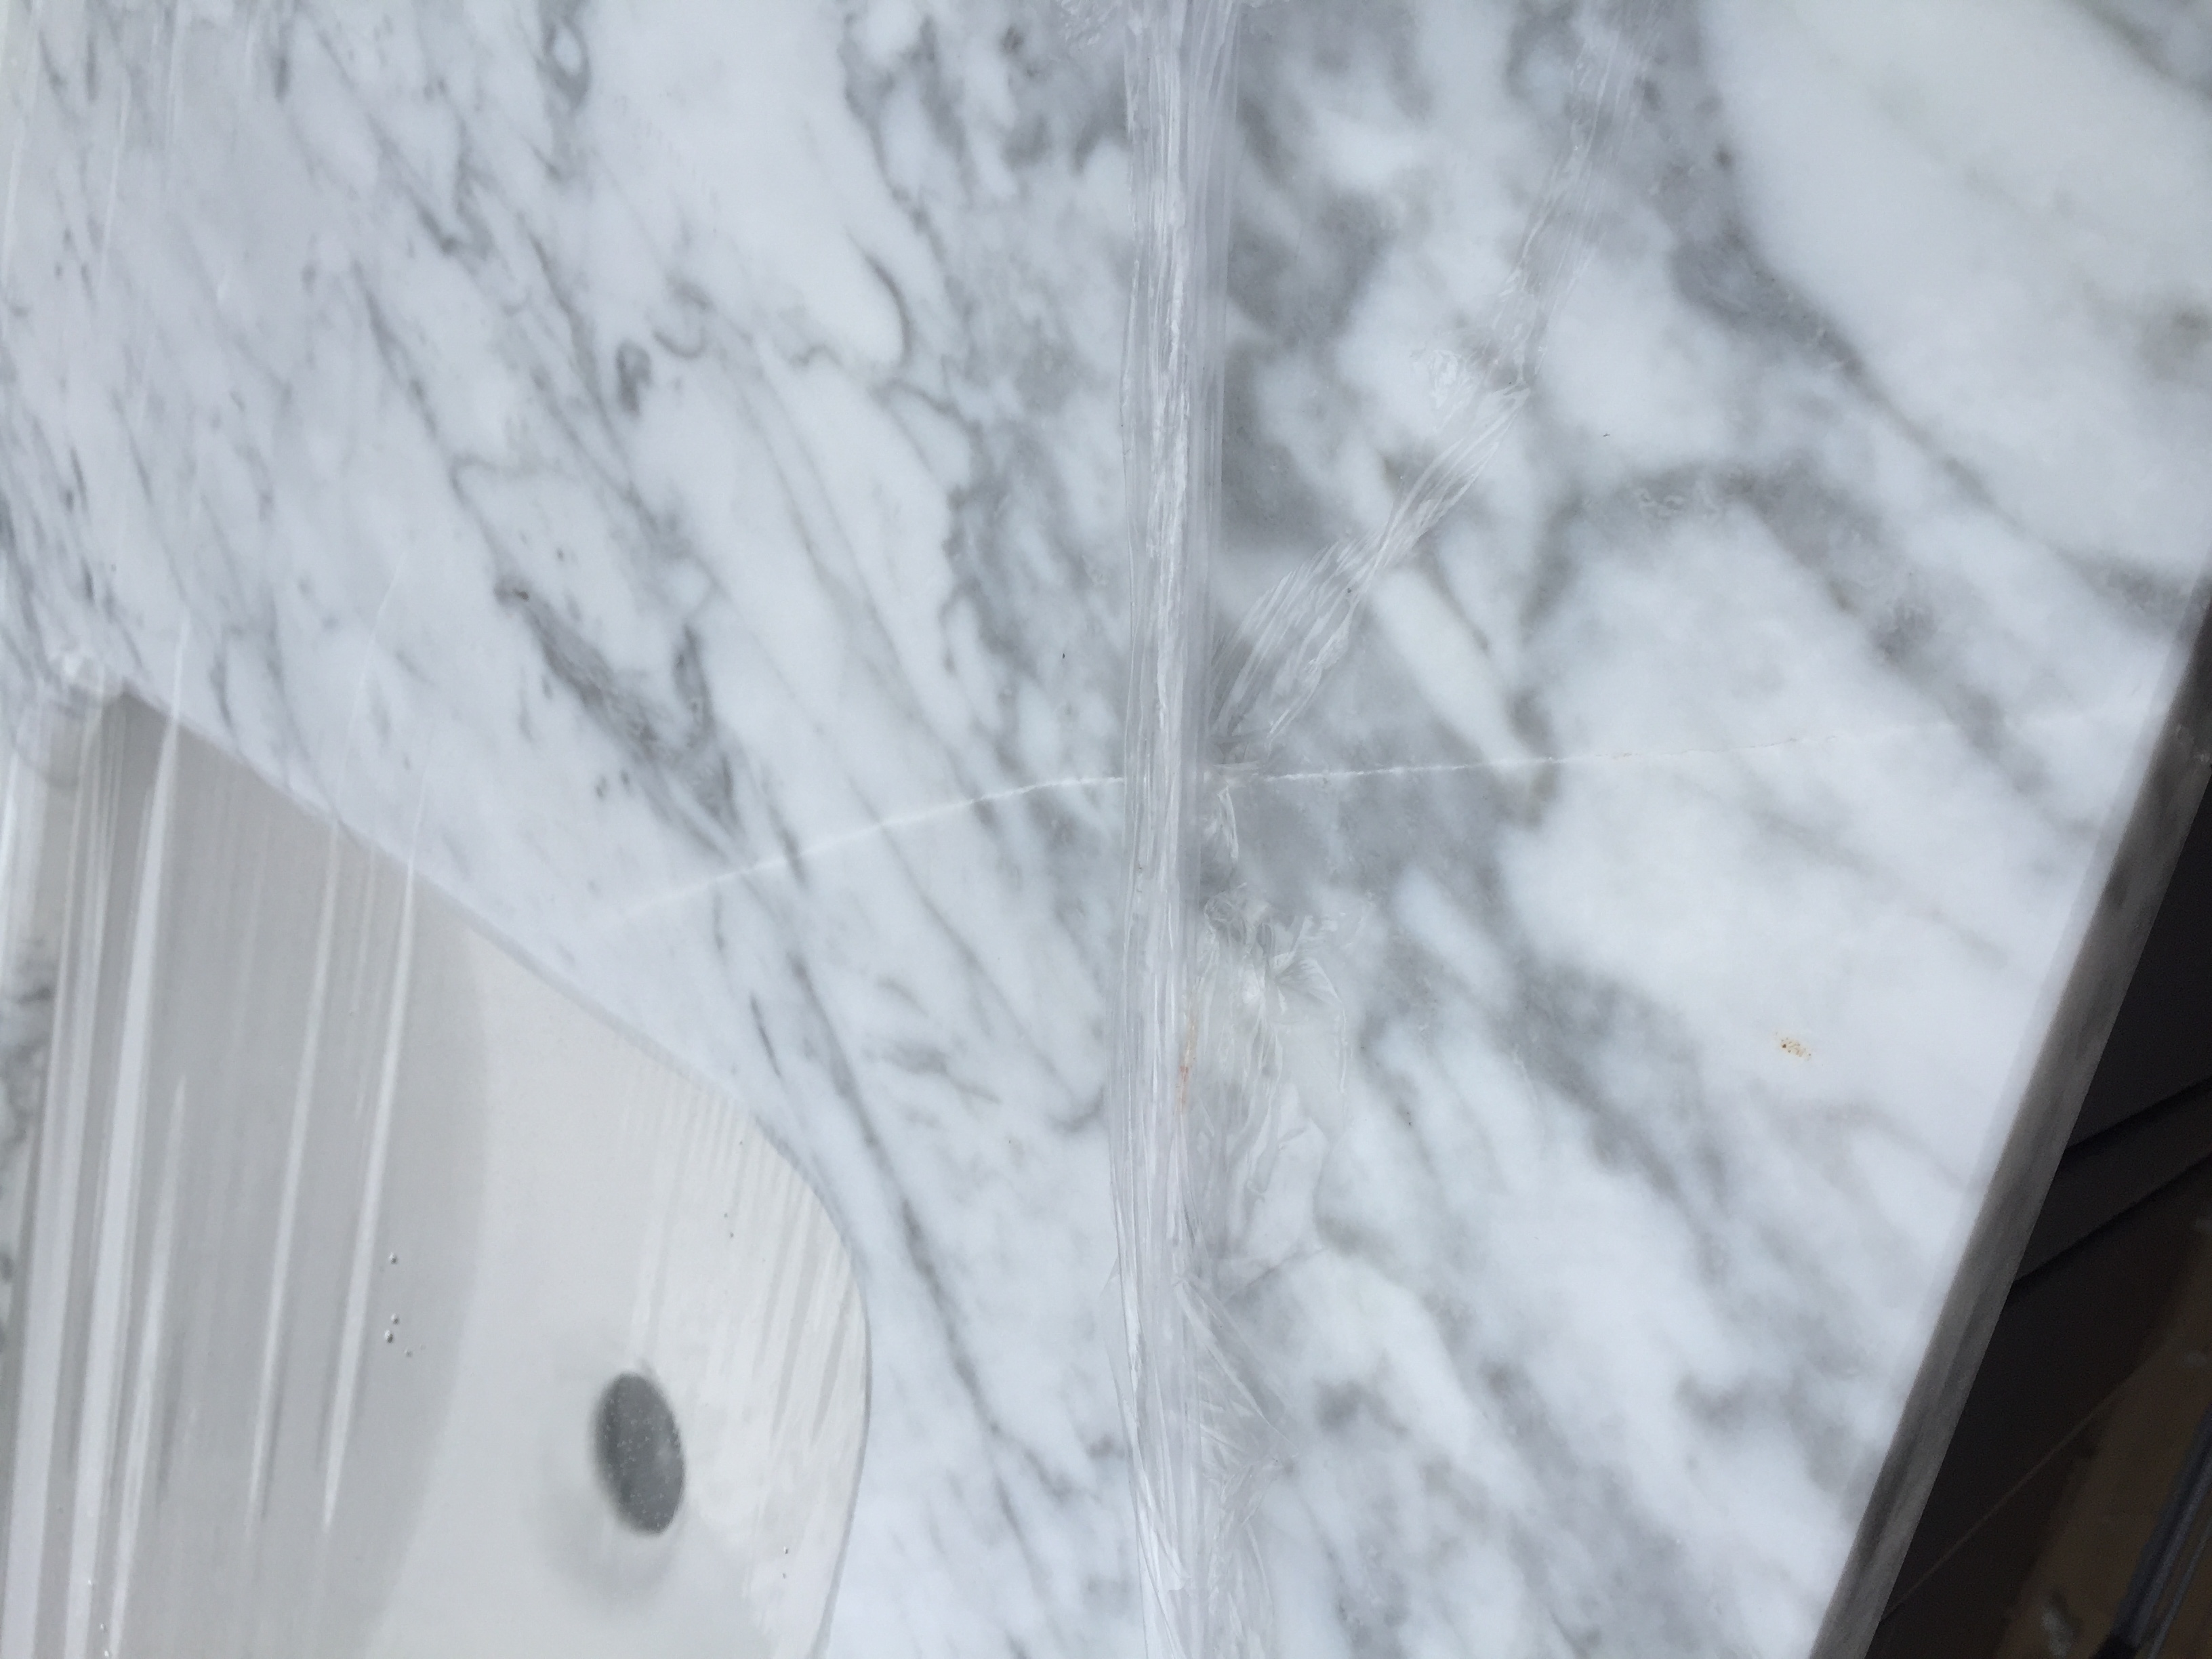 The marble vanity top was cracked from the bowl to the side in three different places